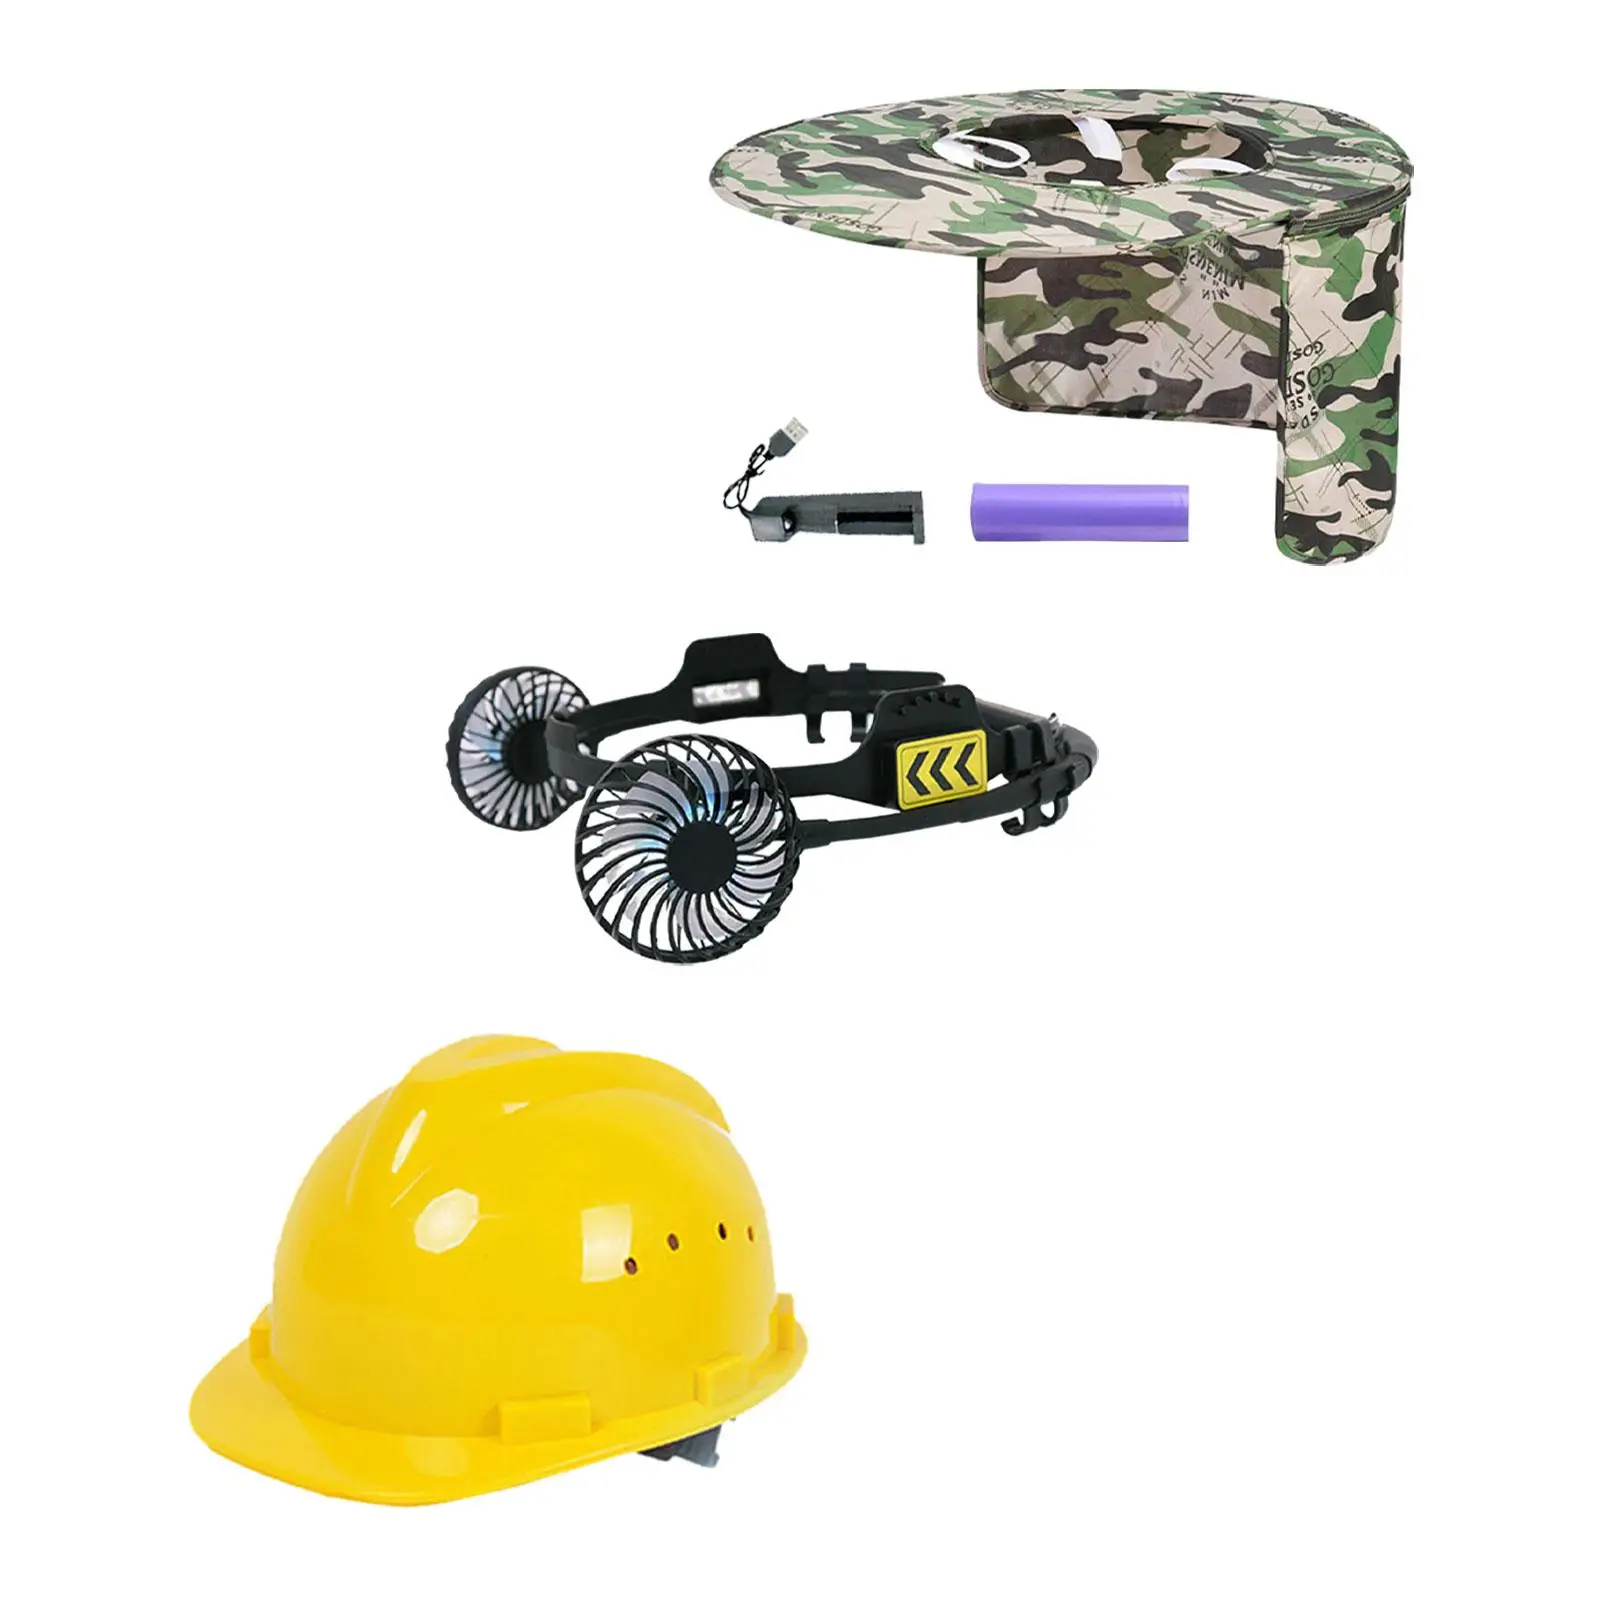 Hard Hat Fan Safety Helmet Fan for Most Caps Style Safety Helmet Adult Cooling Easy to Install Portable Fan for Outdoor Supplies